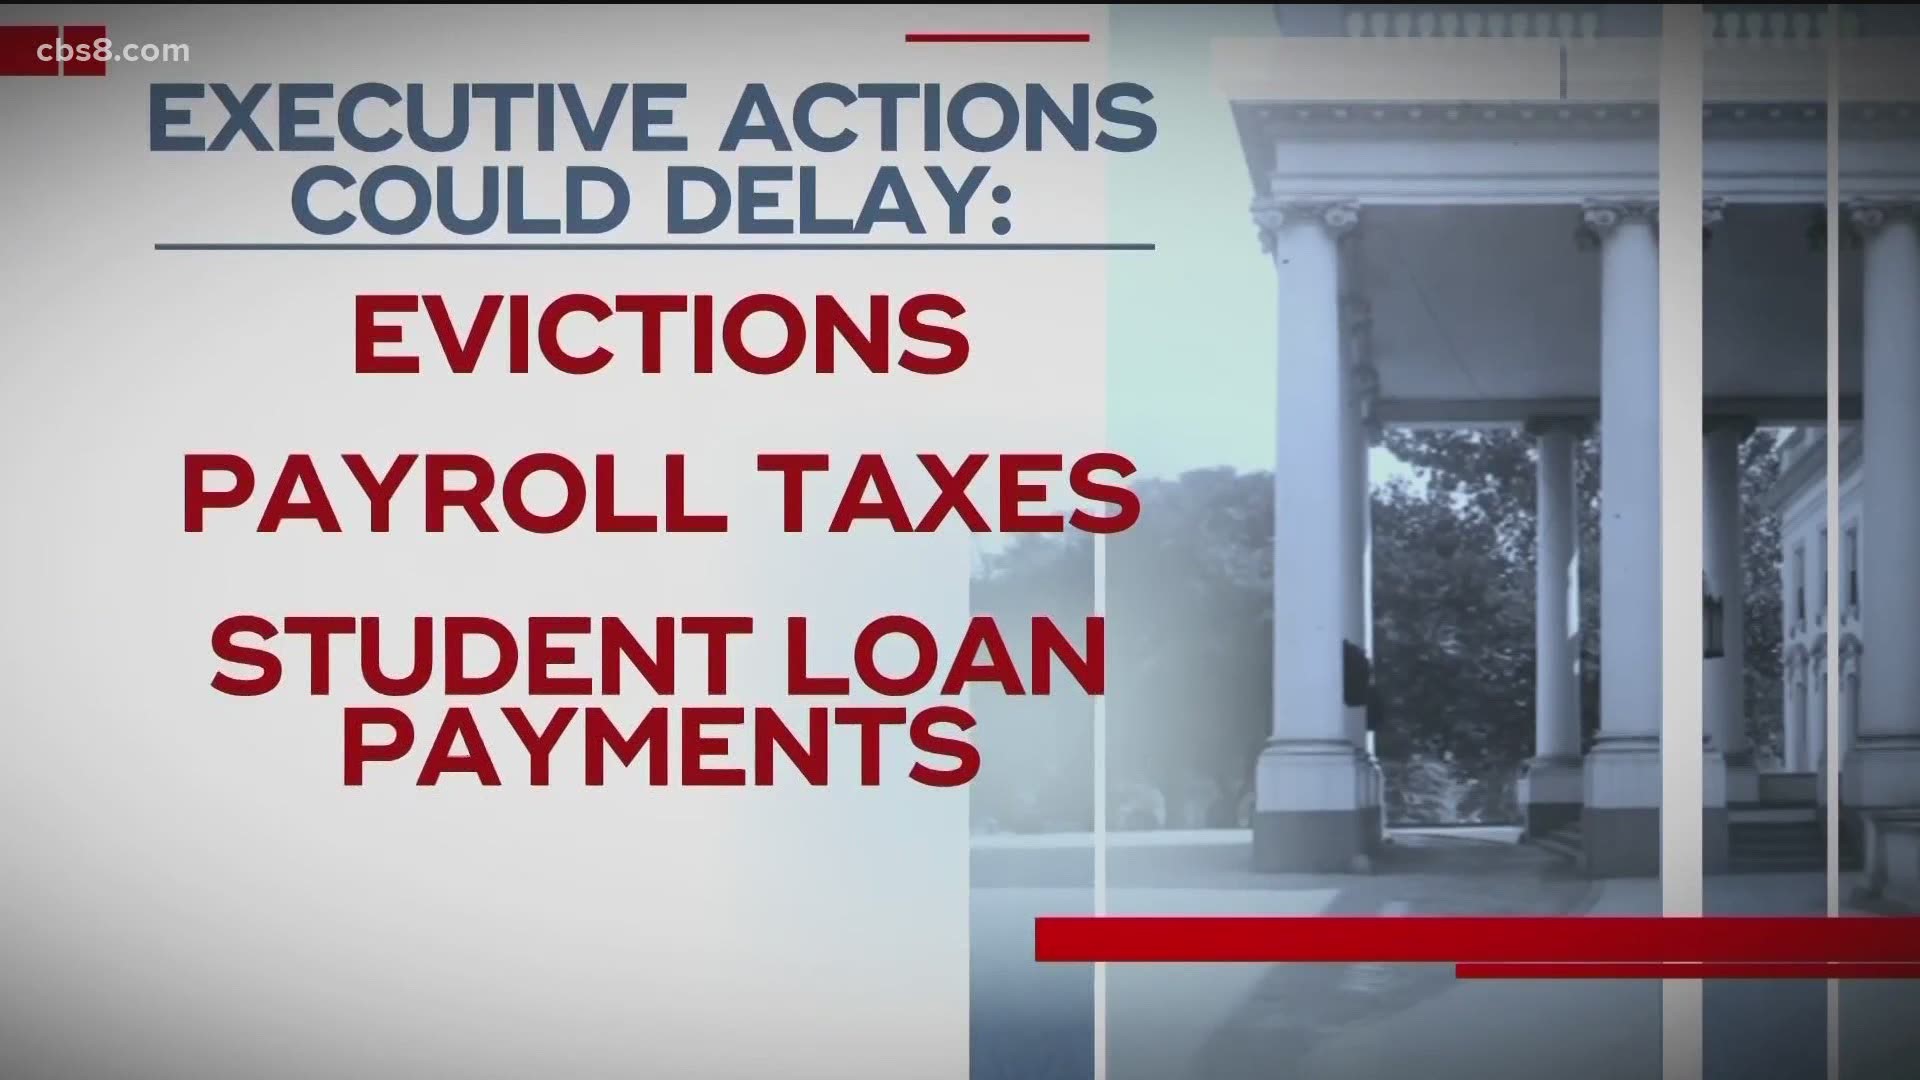 President Trump also put a hold on student loan payments and extended a moratorium on evictions.